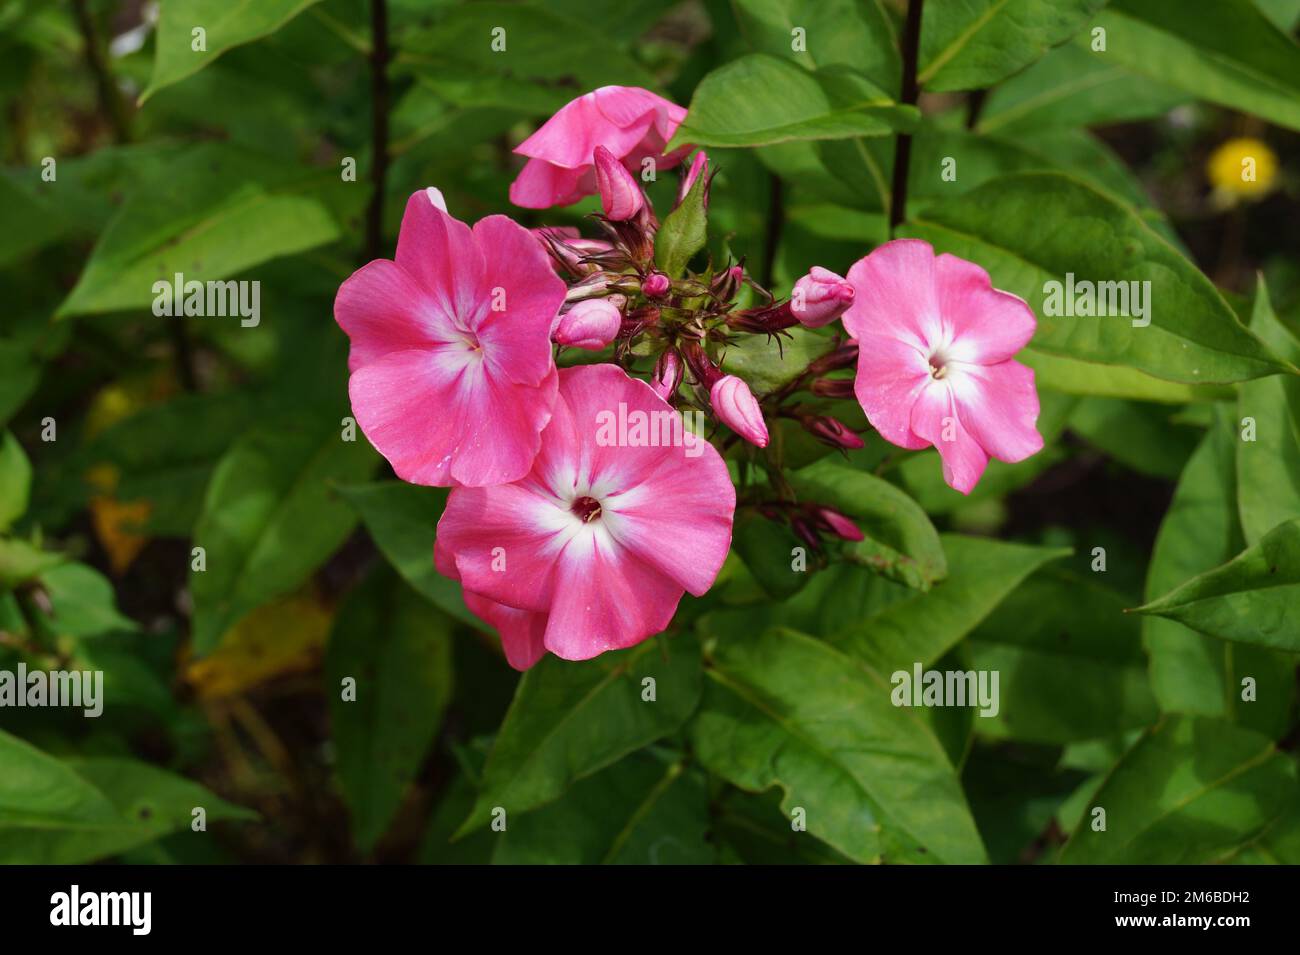 red flowers of flame flower, phlox, in garden Stock Photo